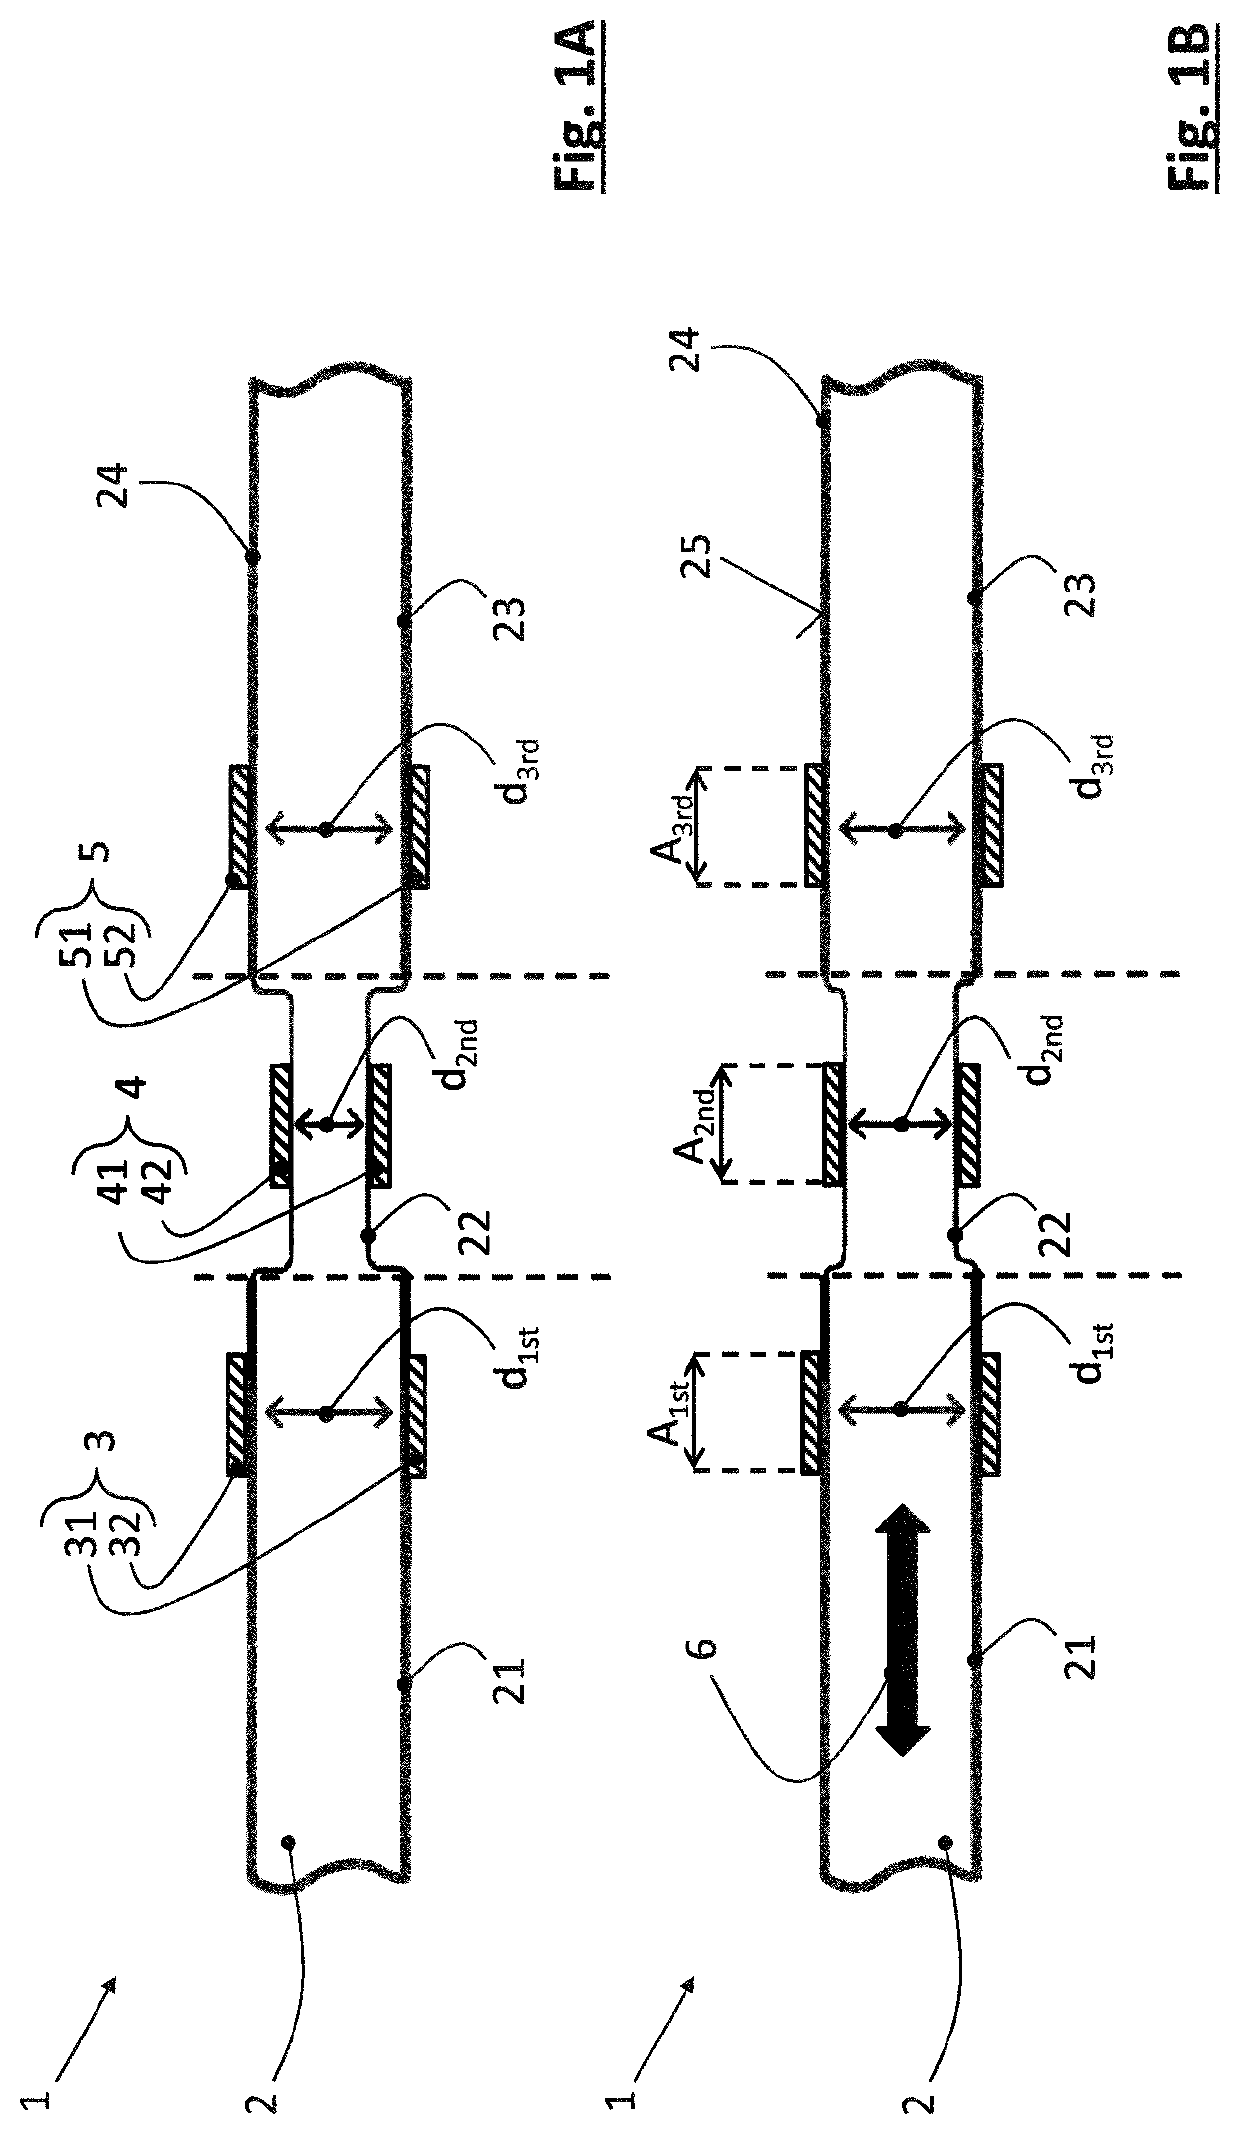 Flow rate sensor system, method for and use of such system for determining a flow rate